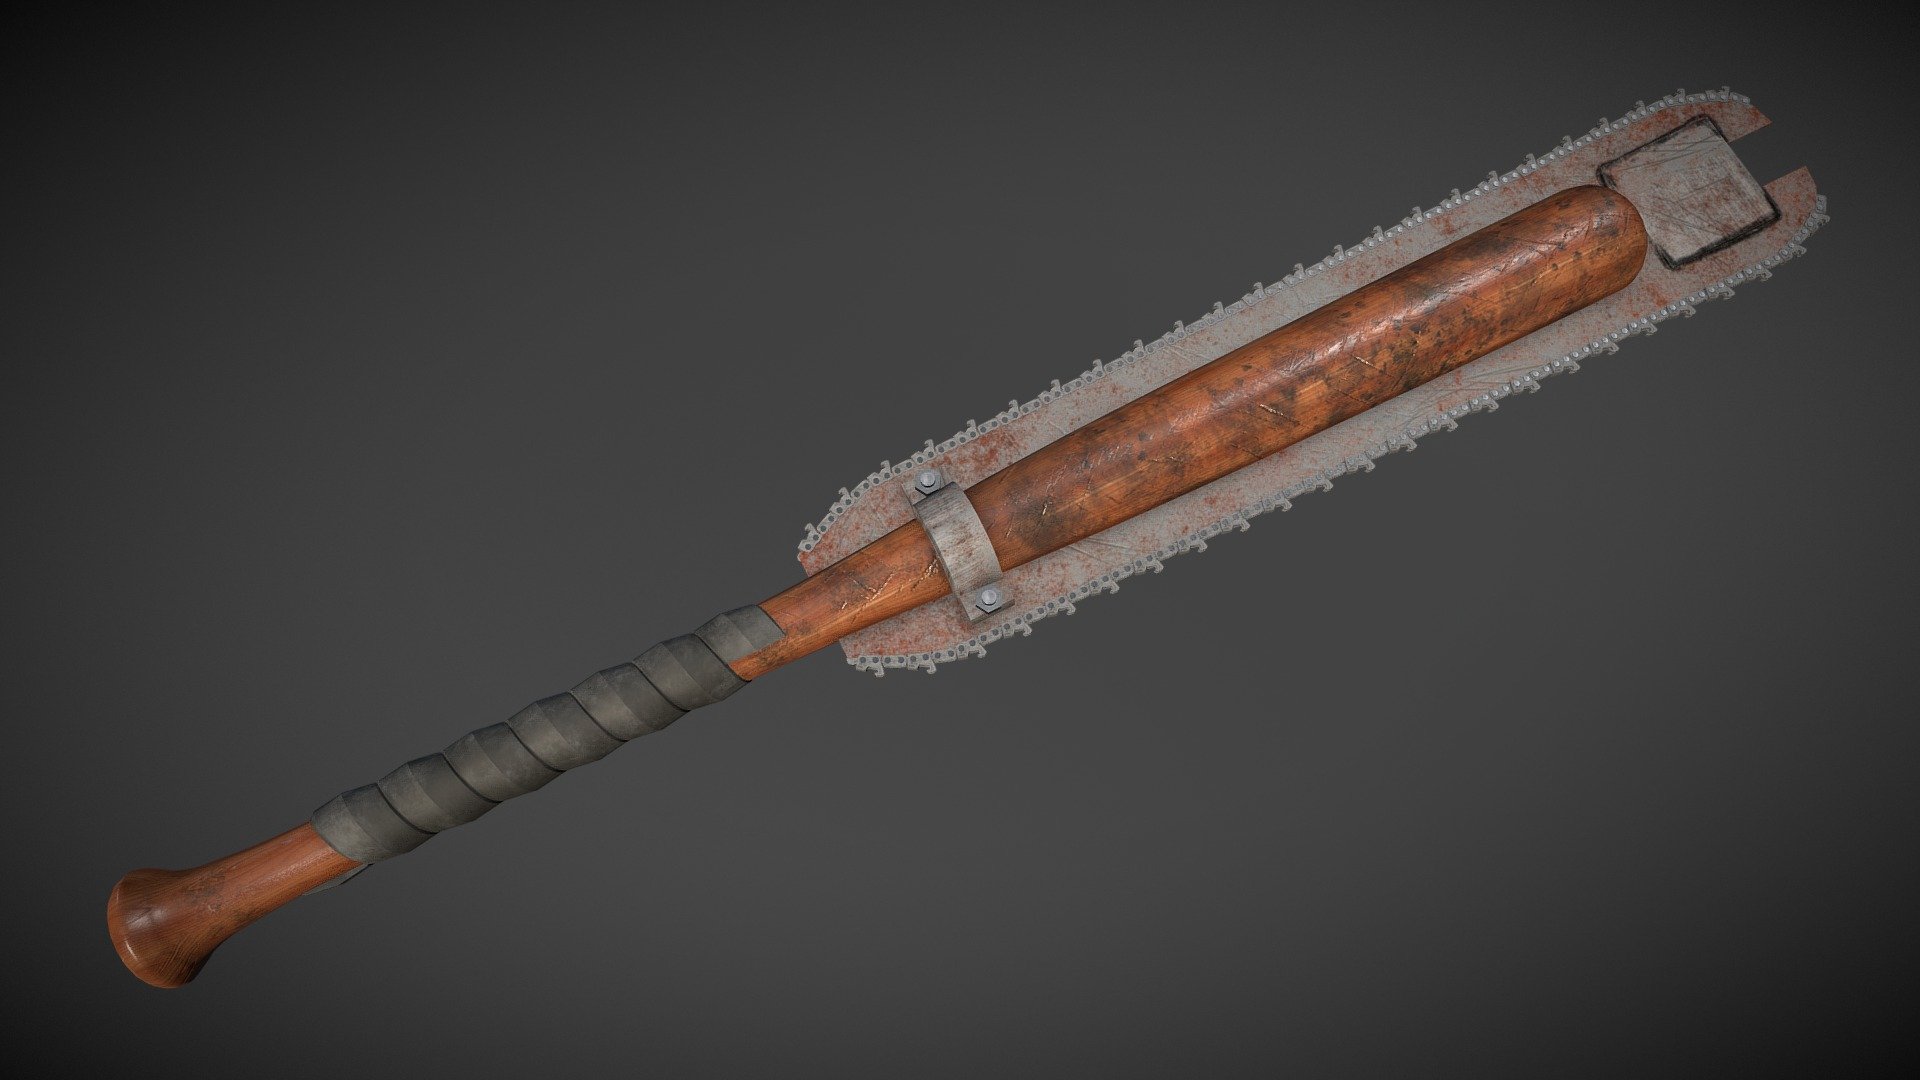 It is a bat that has been modified with two halves of a chainsaw blade making it a type of sword - Saw bat - 3D model by tackettn1 3d model